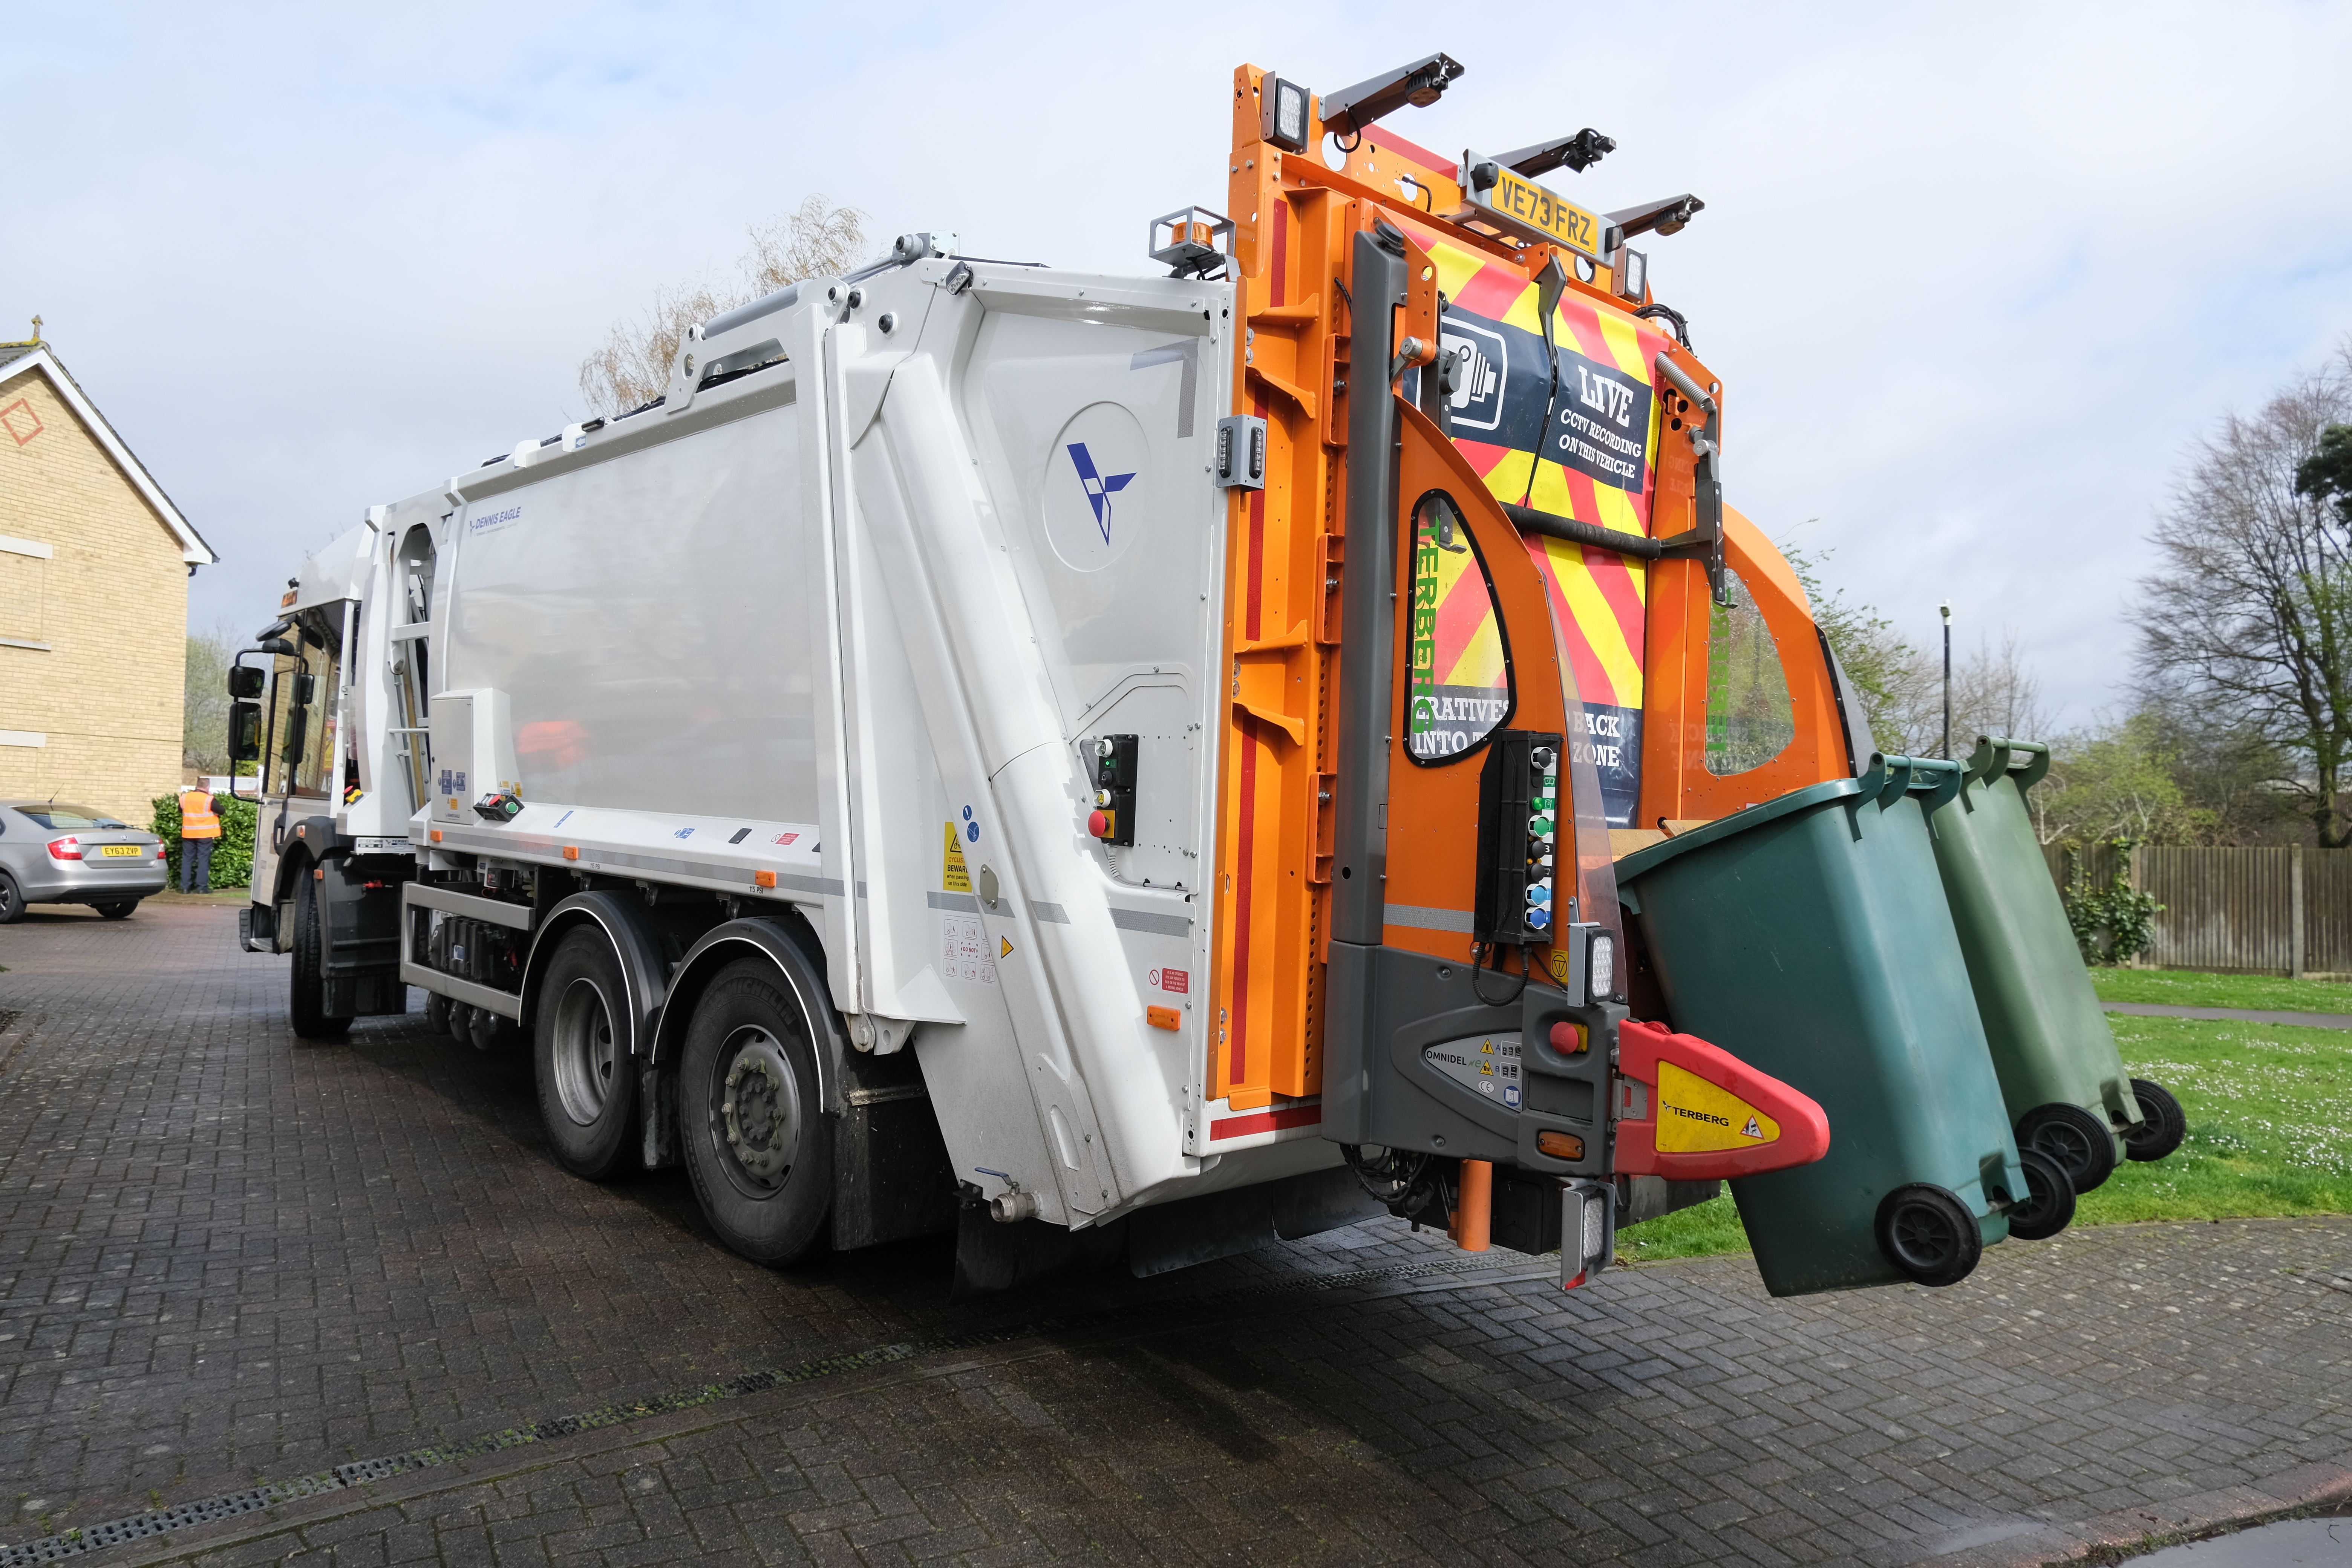 MBC working hard to catch up on waste collections  image